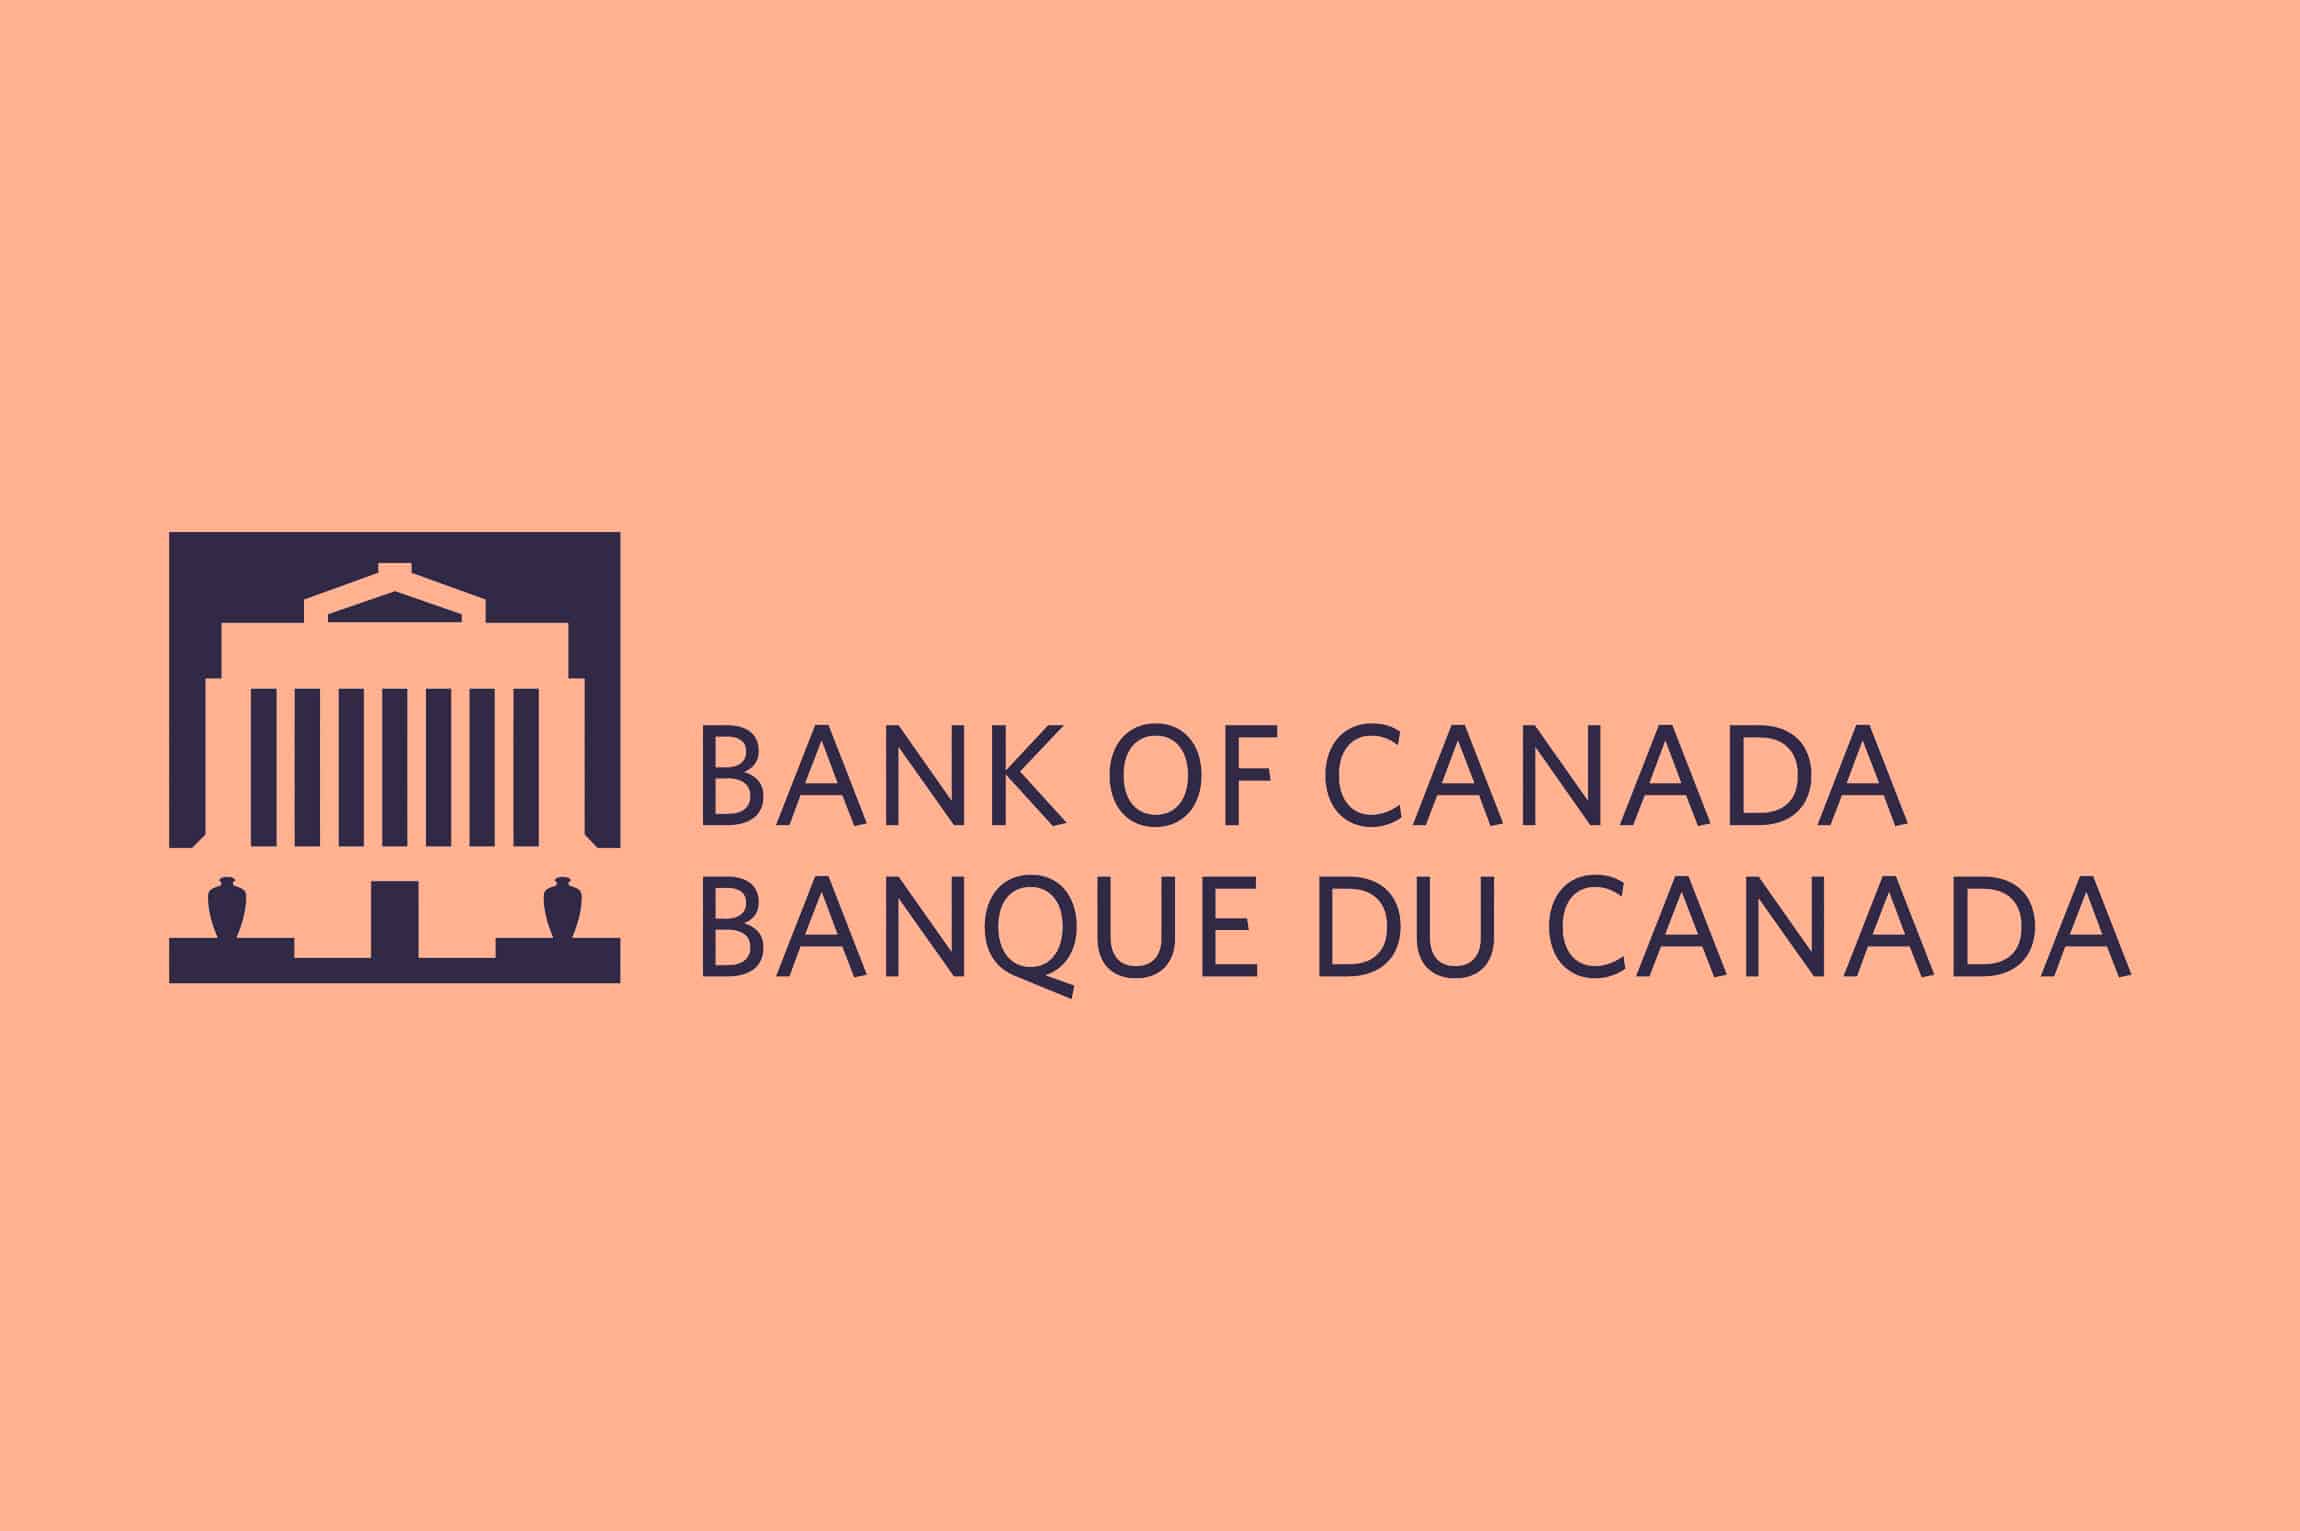 Bank of Canada with orange background